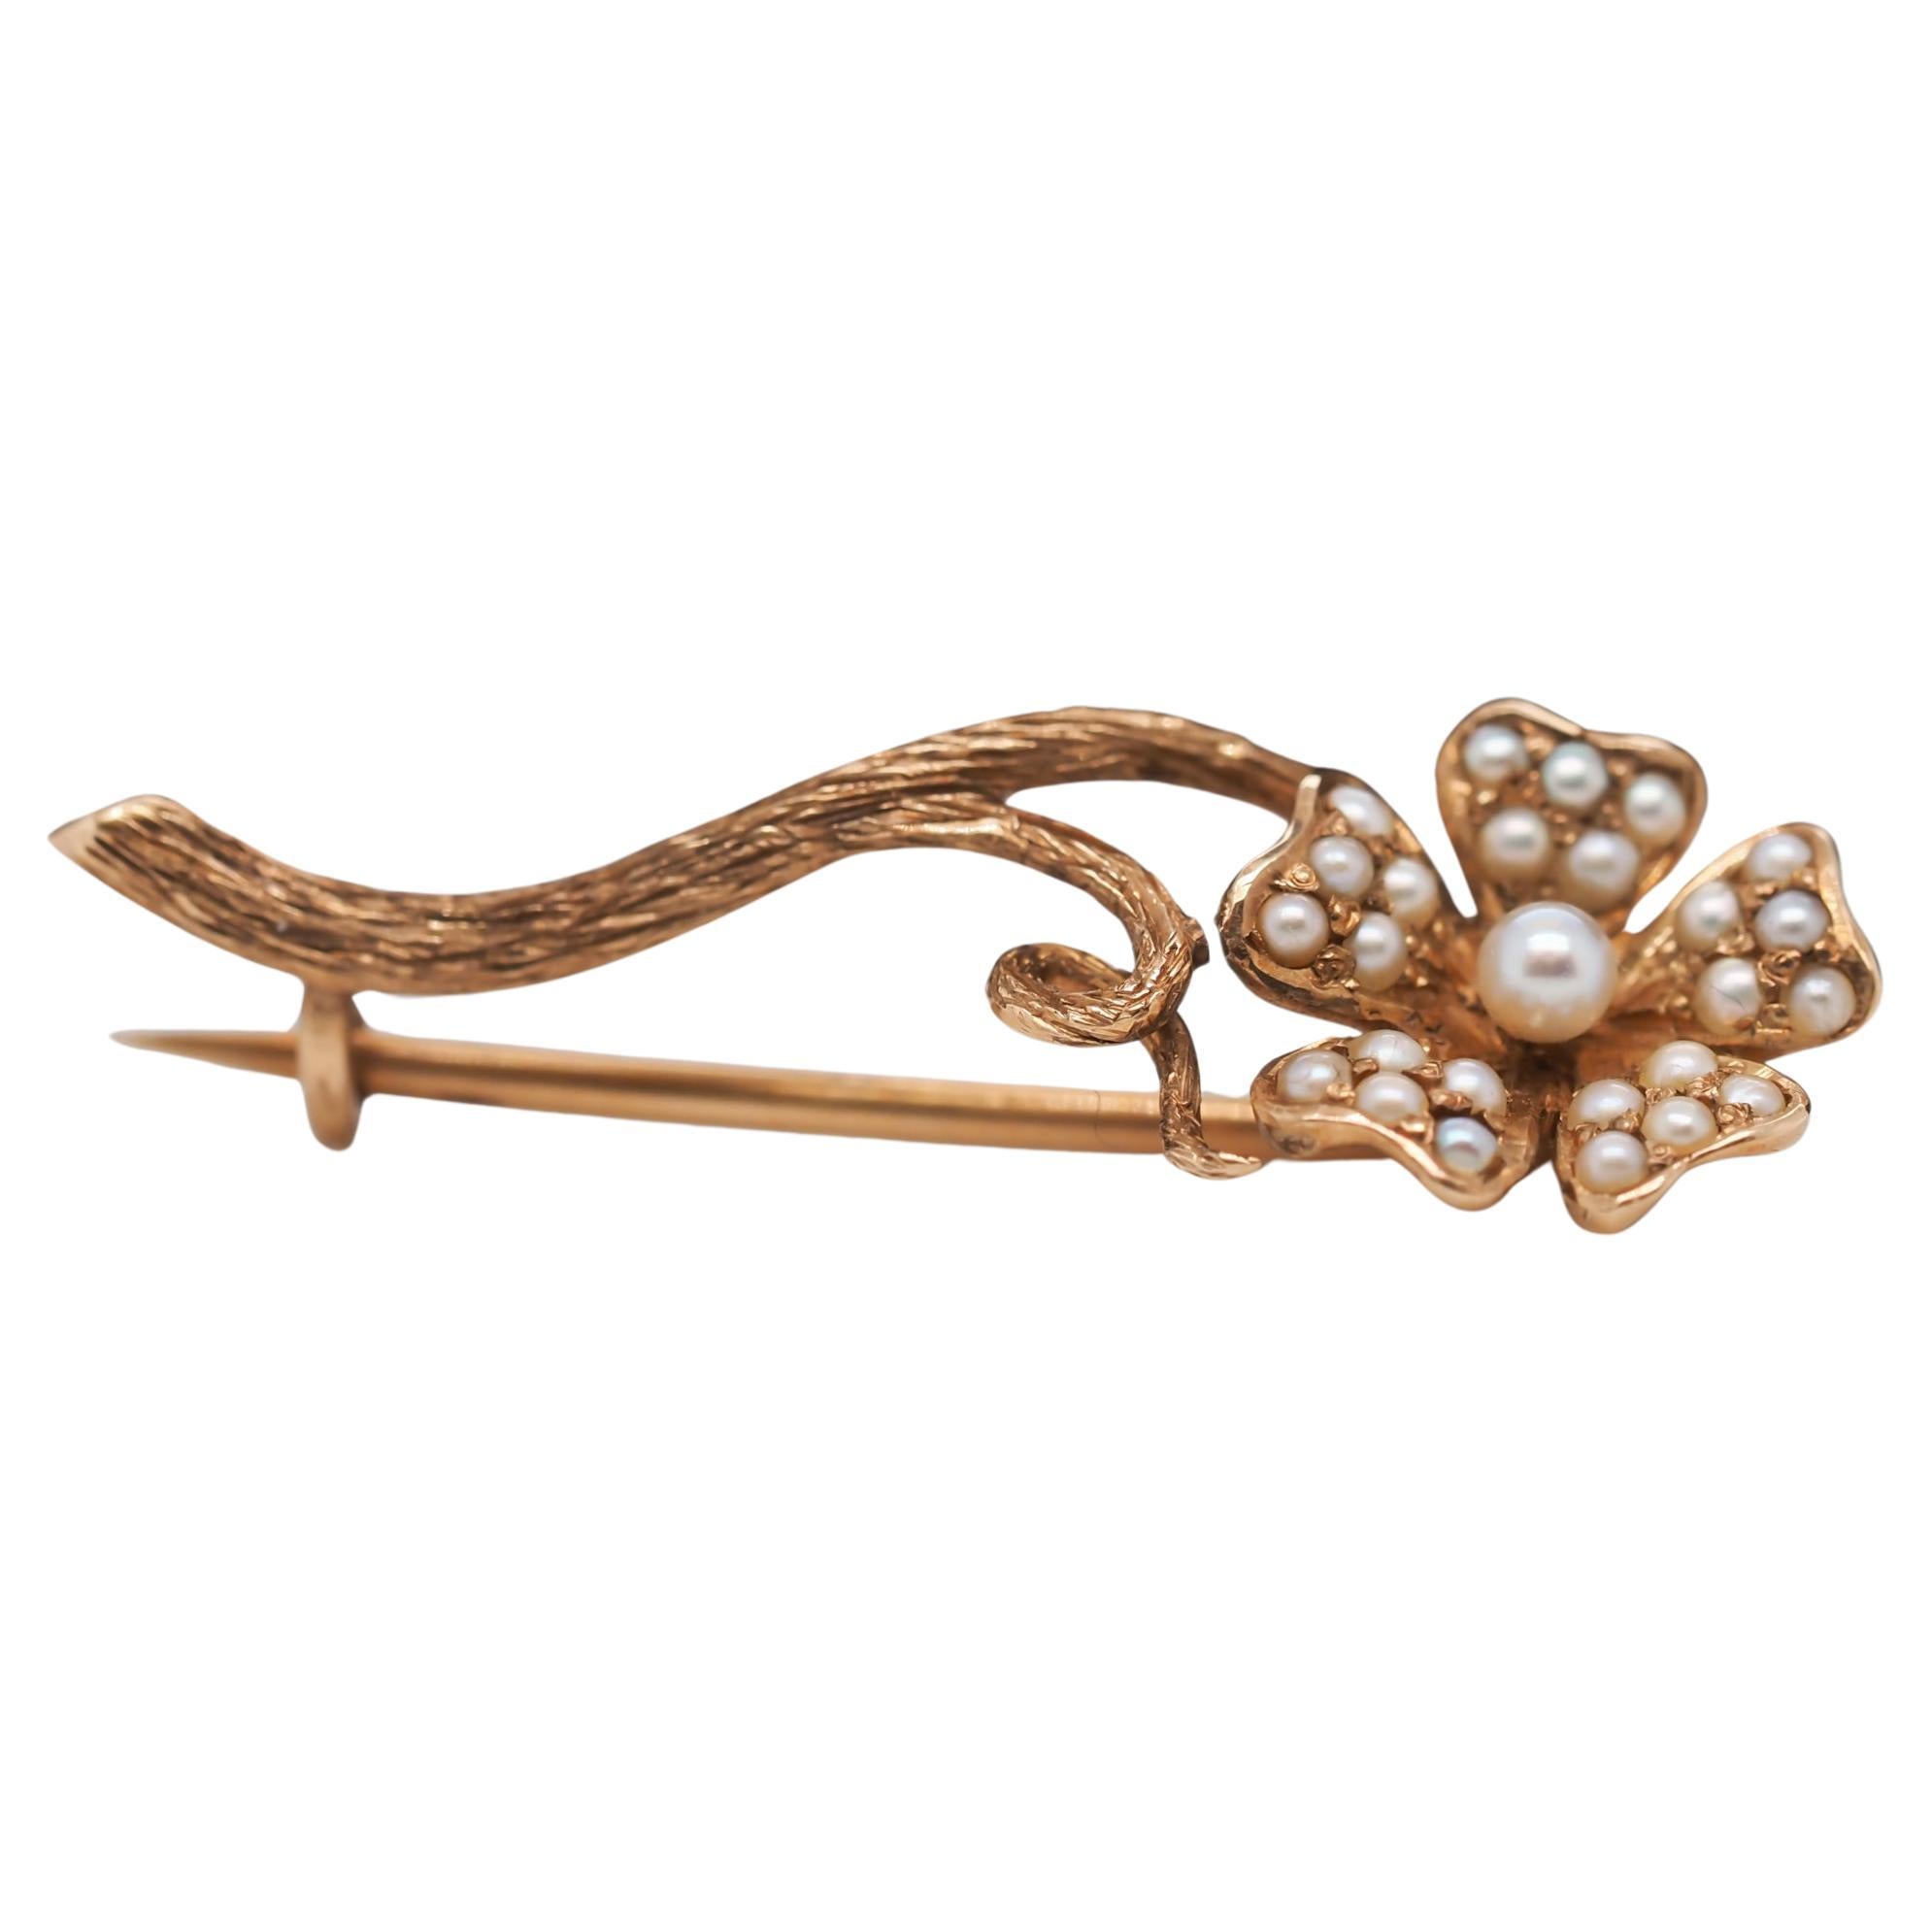 14 Karat Yellow Gold Victorian Flower Pin and Brooch with Pearls